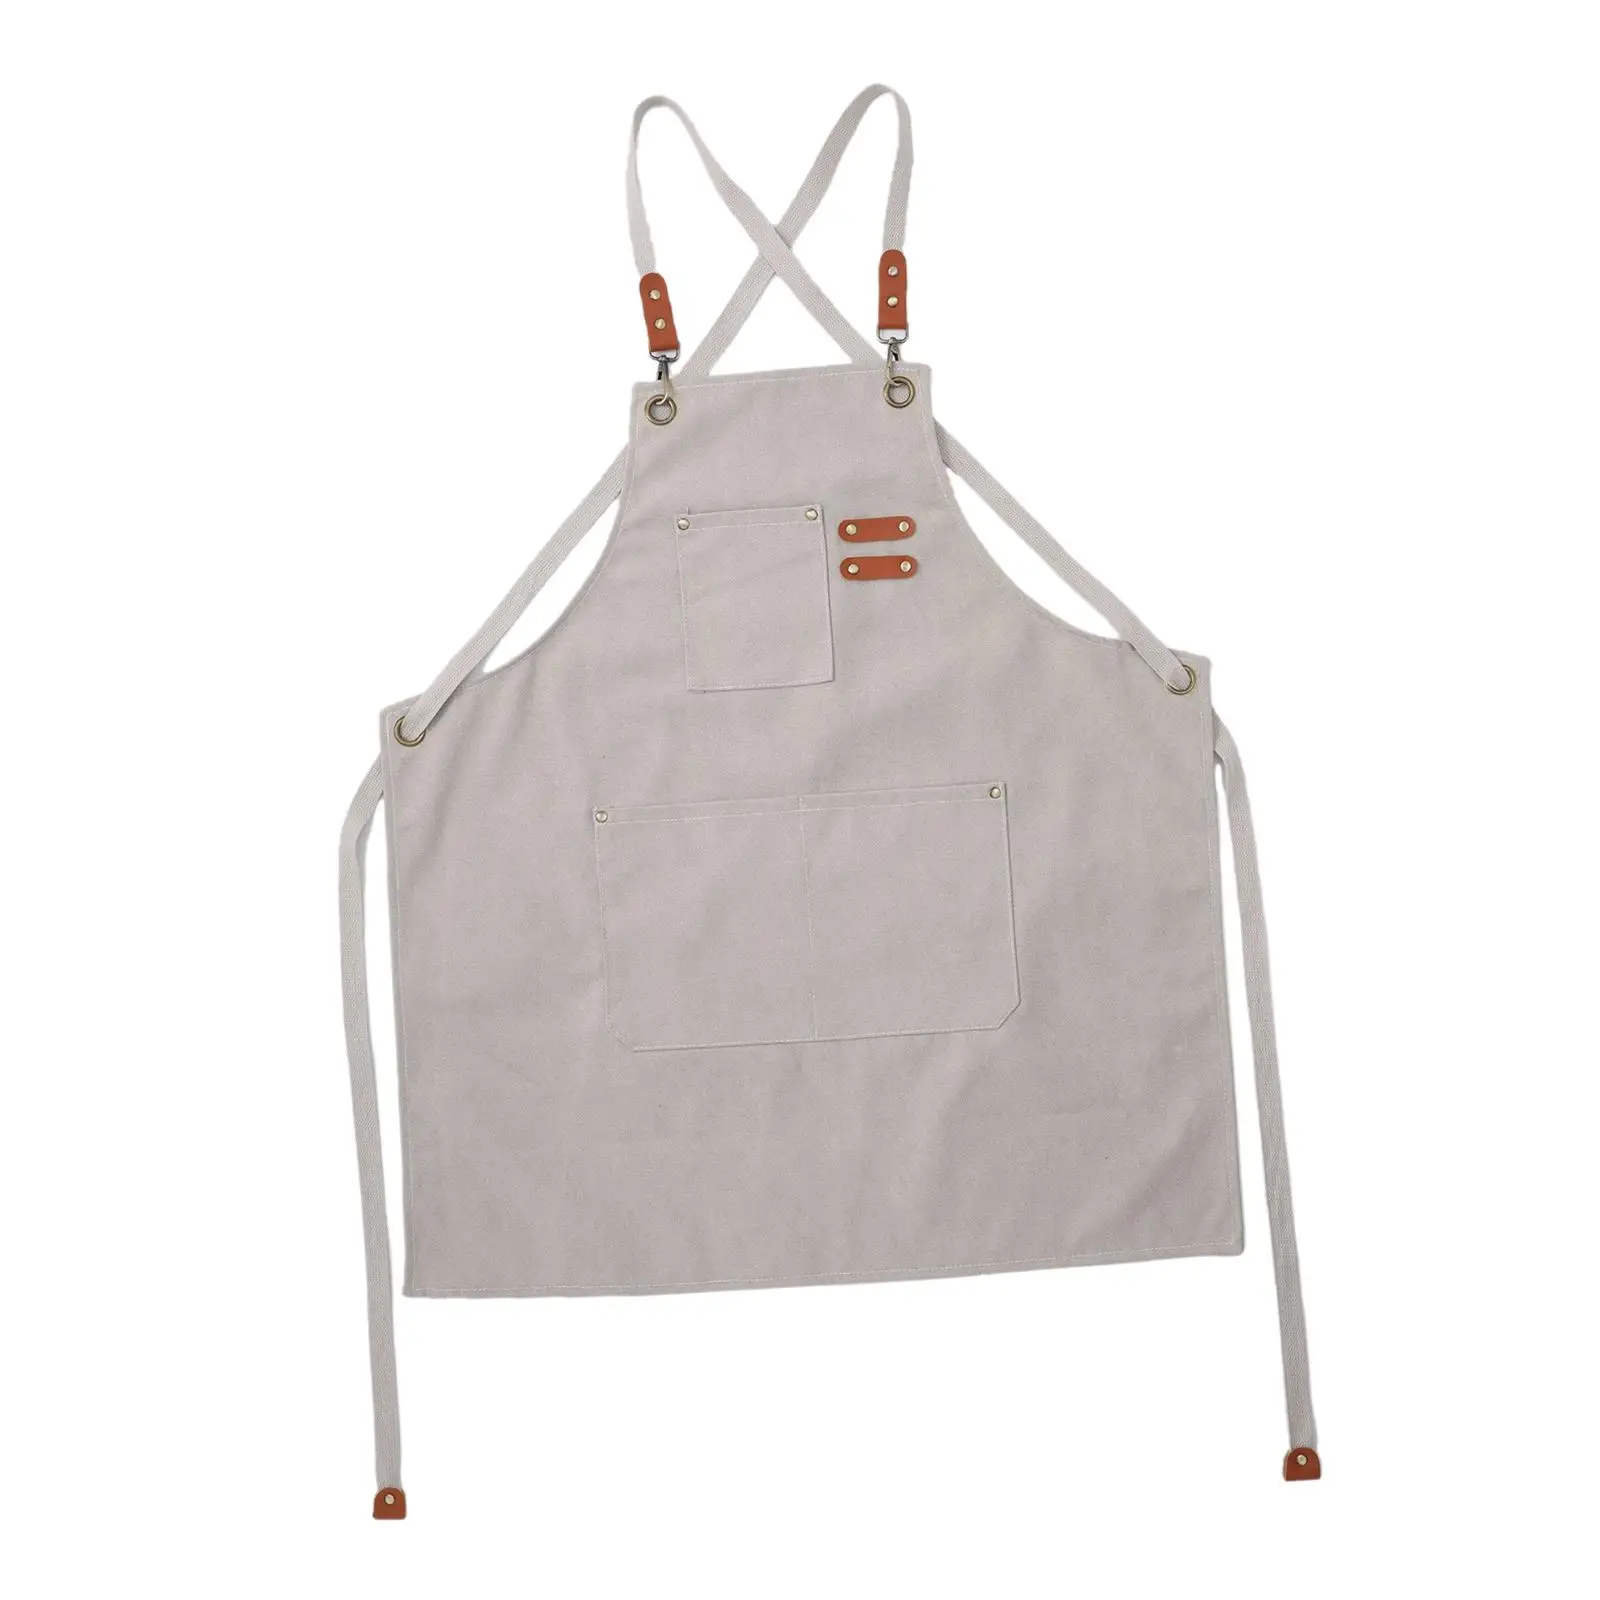 Work Bib Apron Strap Kitchen Cooking Apron for Outdoor Barbecue